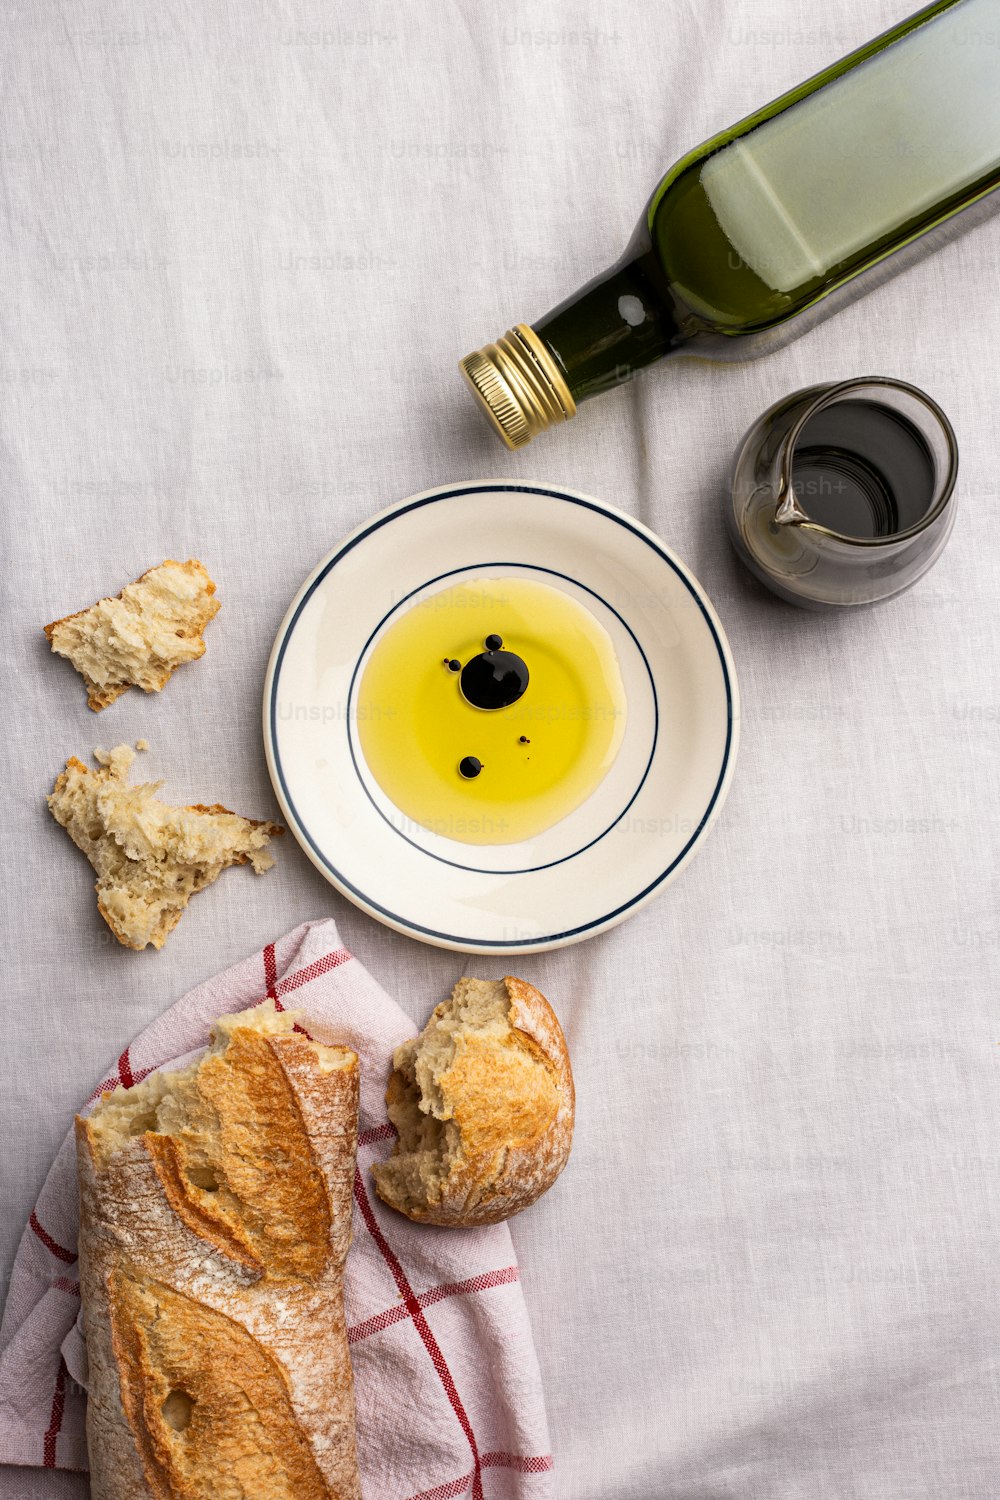 a bowl of olive oil next to a loaf of bread and a bottle of olive